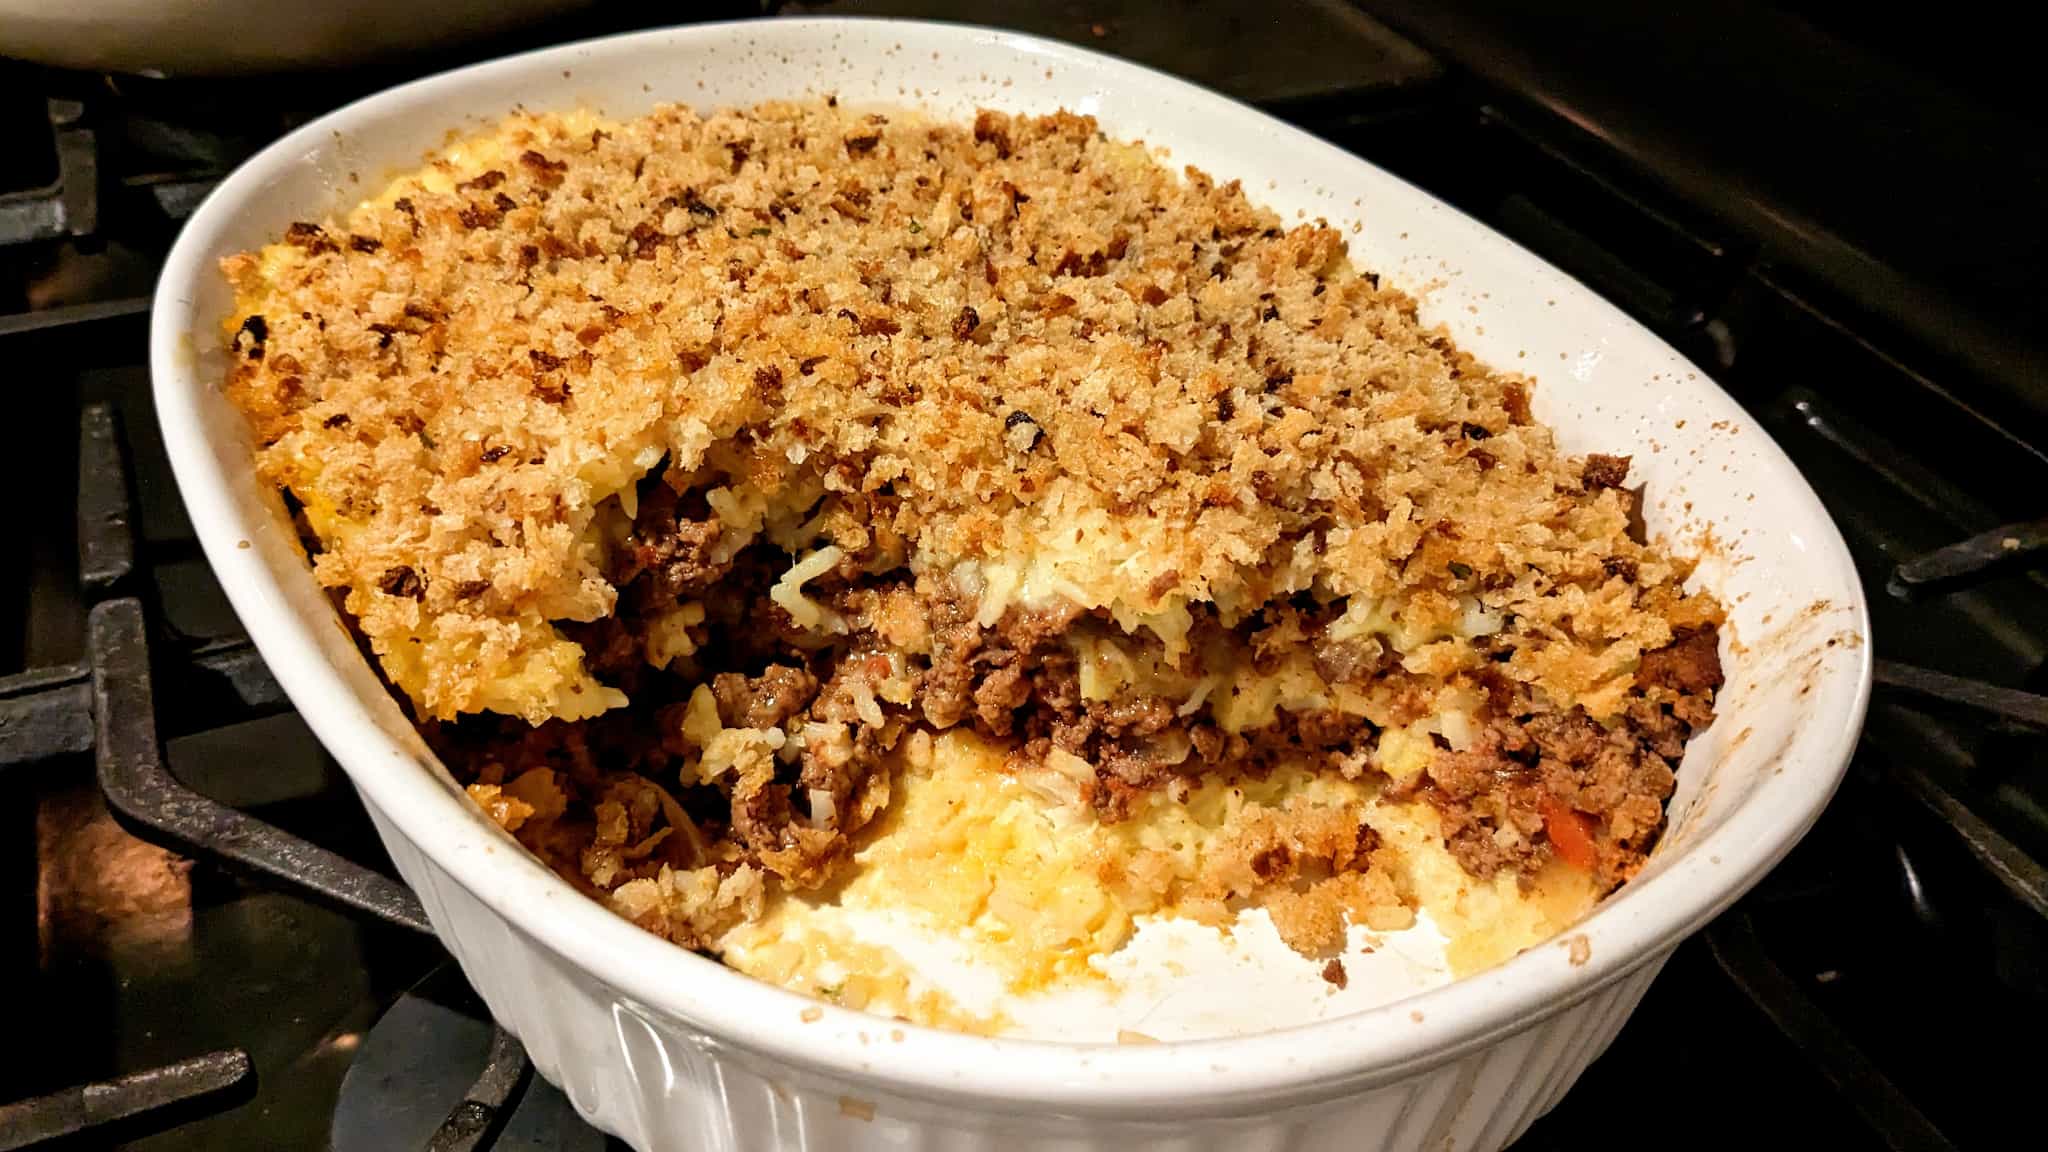 Casserole dish with some food removed showing layers of rice and ground beef topped with breadcrumbs.